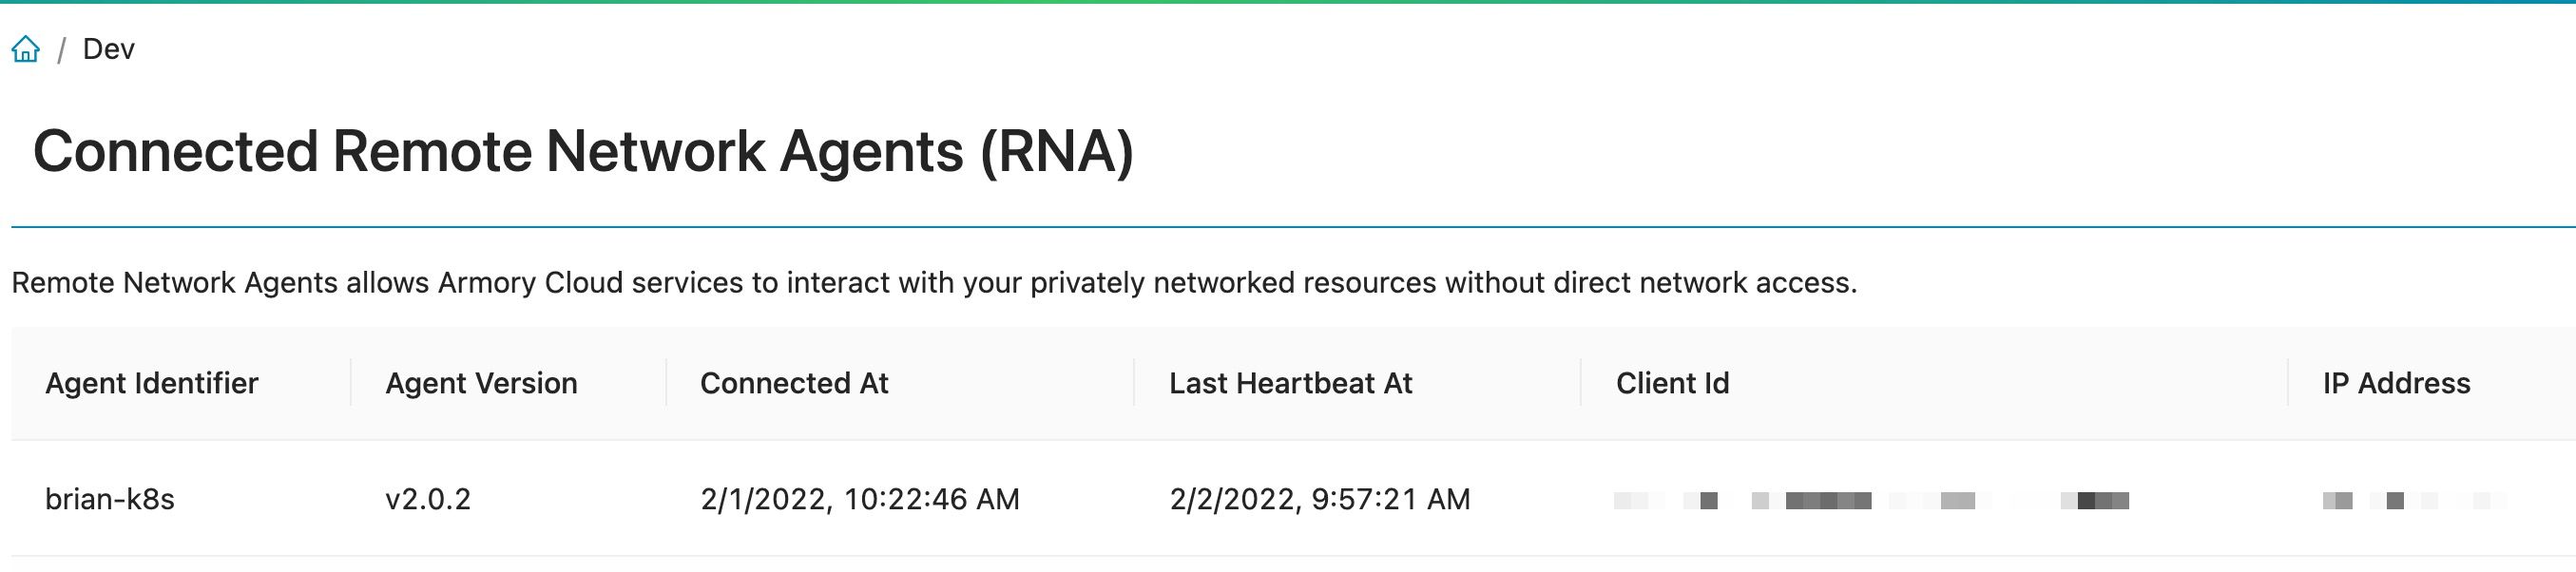 The Connected Remote Network Agents page shows connected agents and the following information: Agent Identifier, Agent Version, Connection Time when the connection was established, Last Heartbeat time, Client ID, and IP Address.